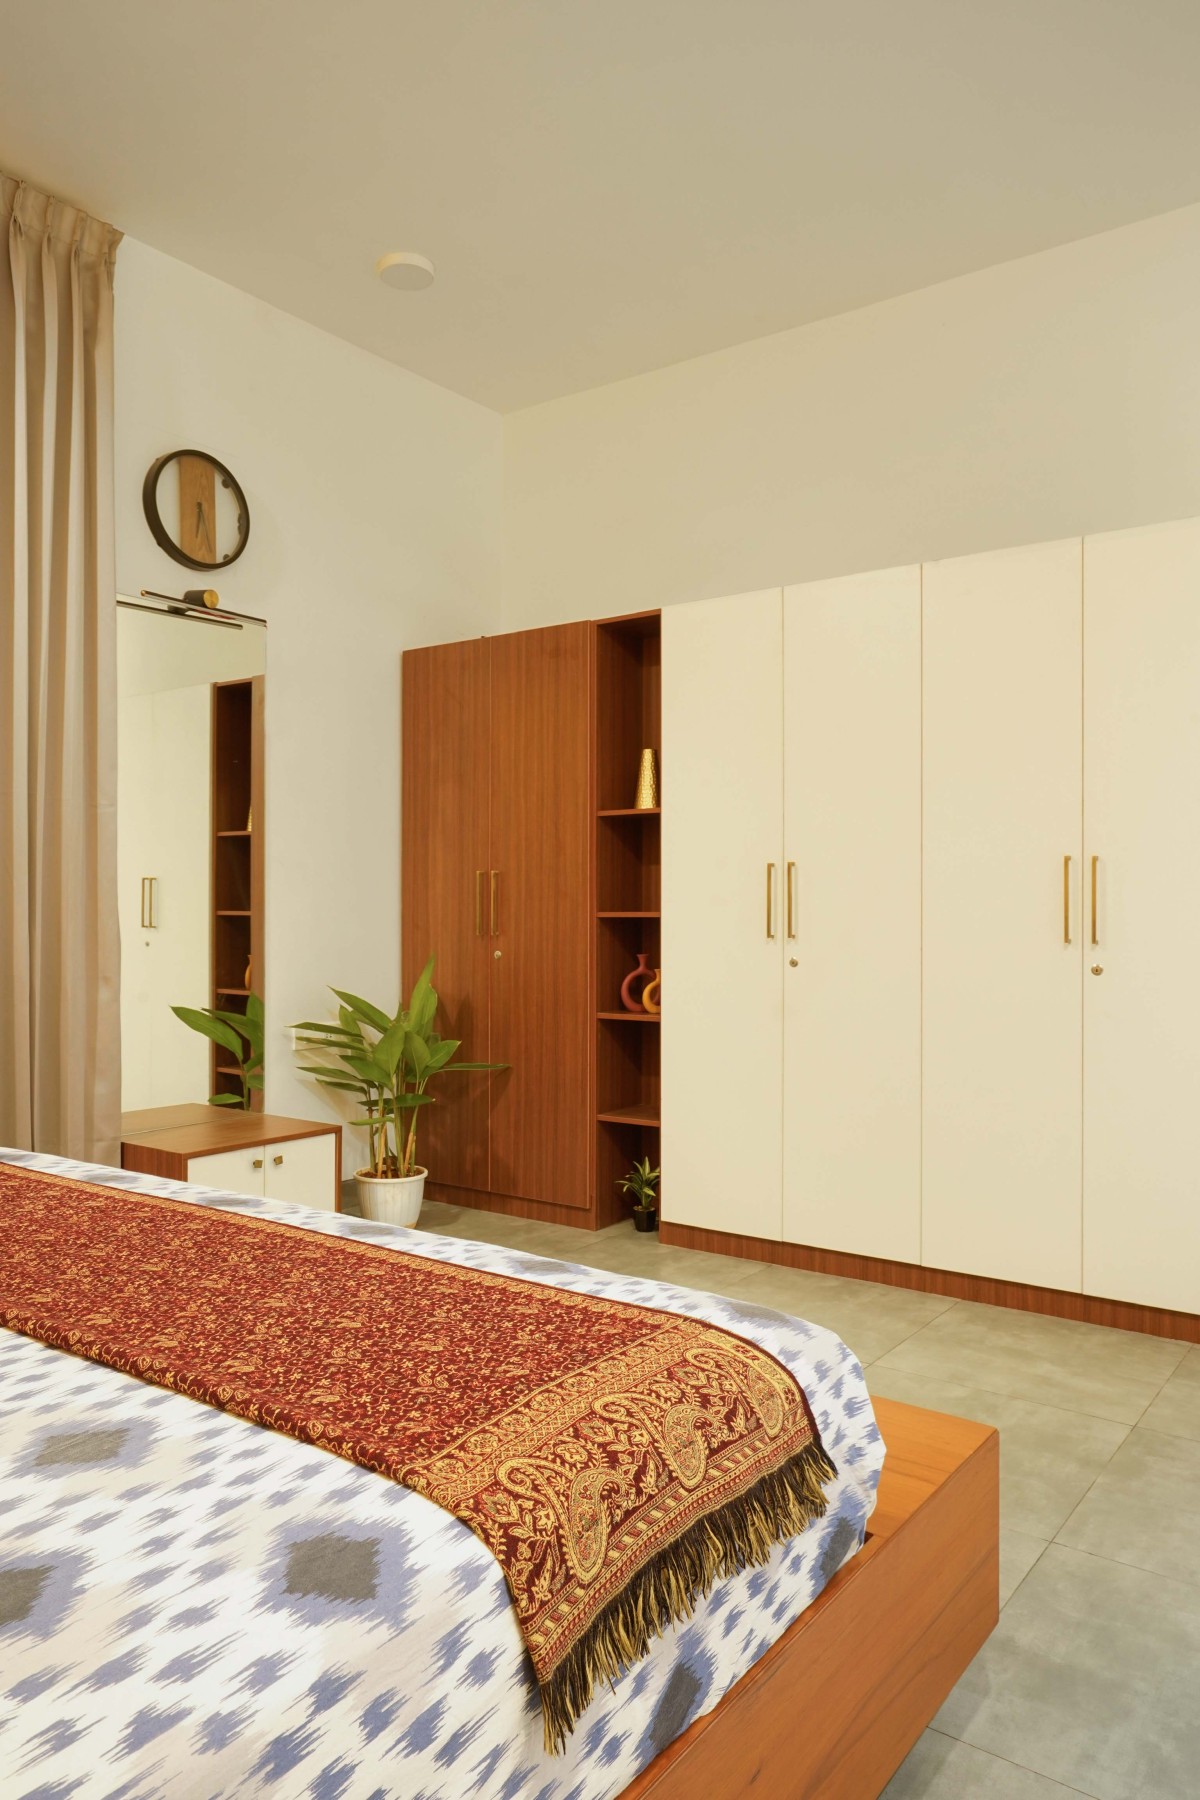 Bedroom of Athulyam by Outlined Architects